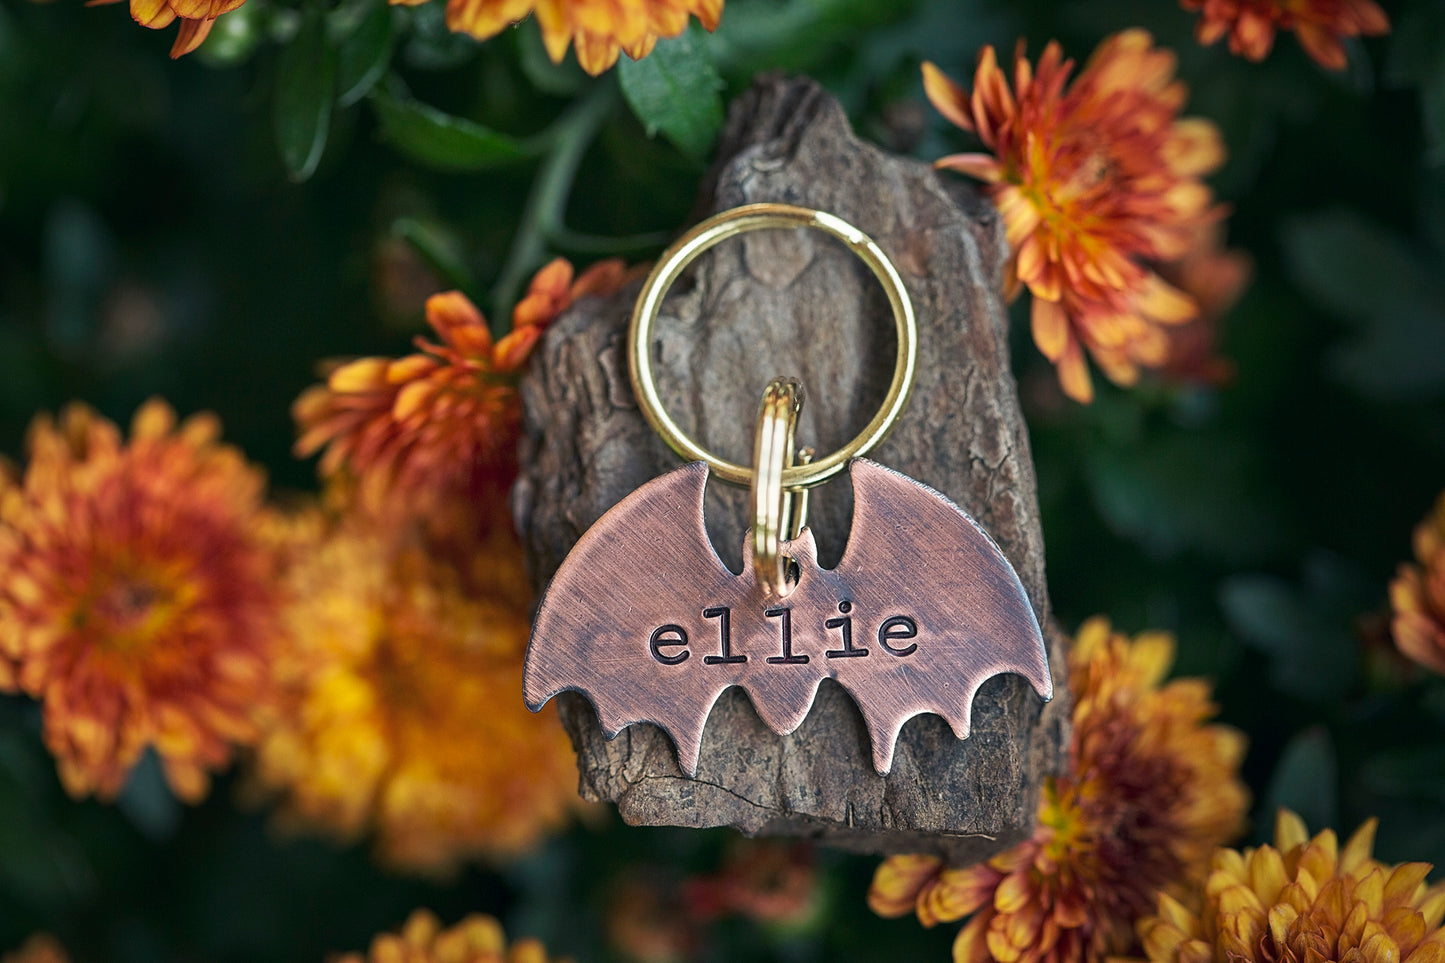 This is a bat-shaped dog or cat ID tag. It is made of copper and hand-stamped with your pet's name on the front and an optional phone number on the back.